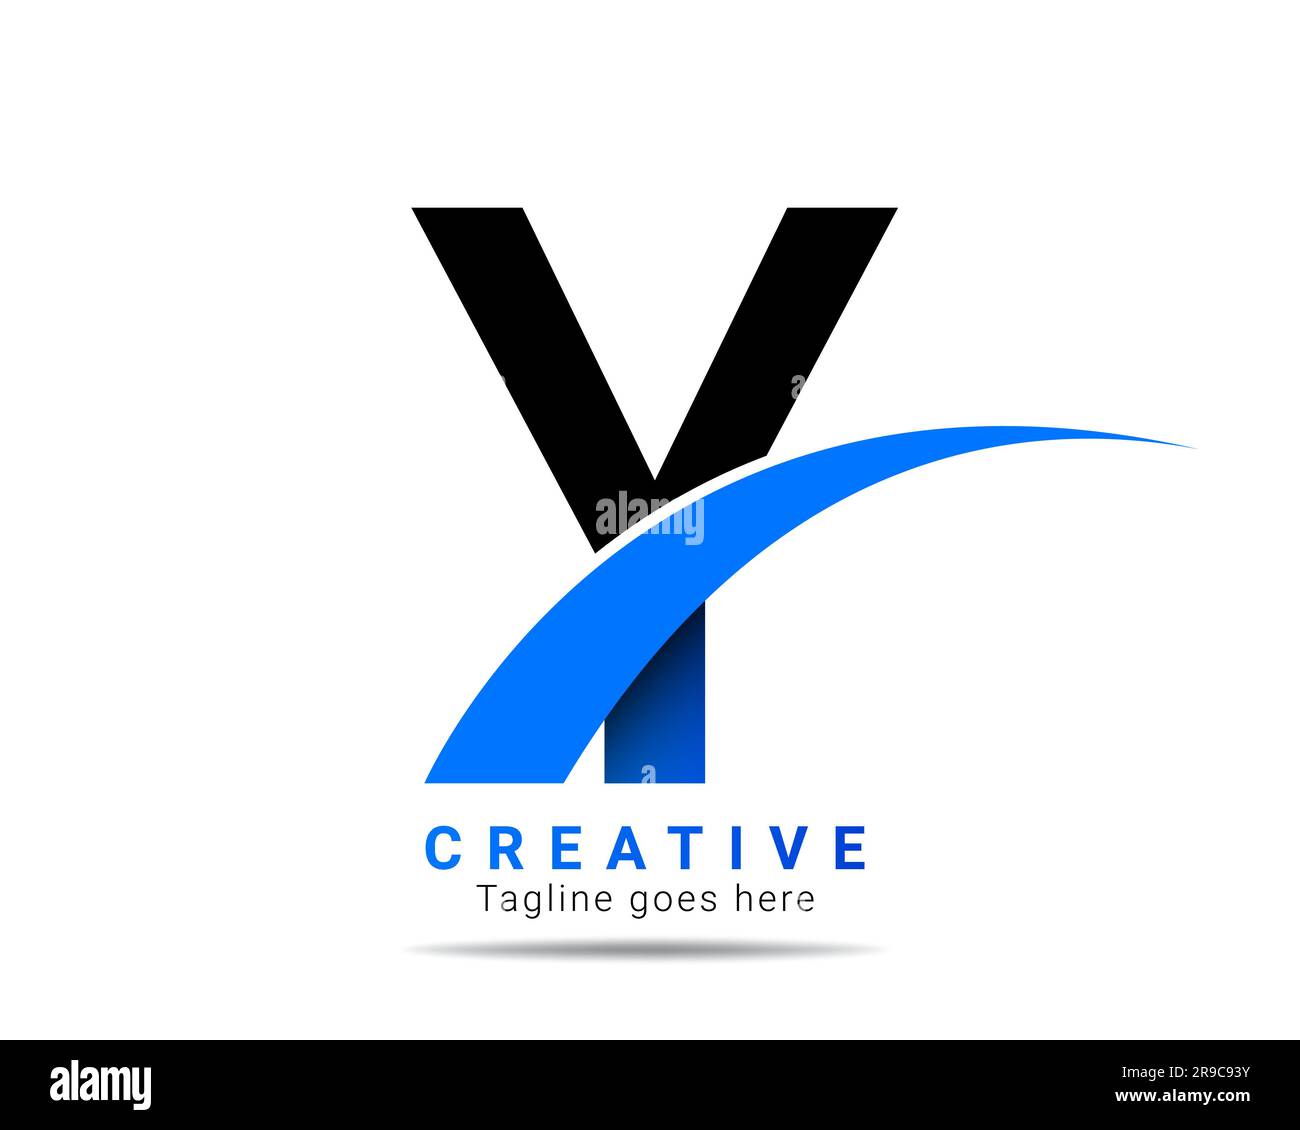 Abstract initial letter Y alphabet logo with blue color. Y letter logo for company brand identity, travel, logistic, business logo template Stock Vector